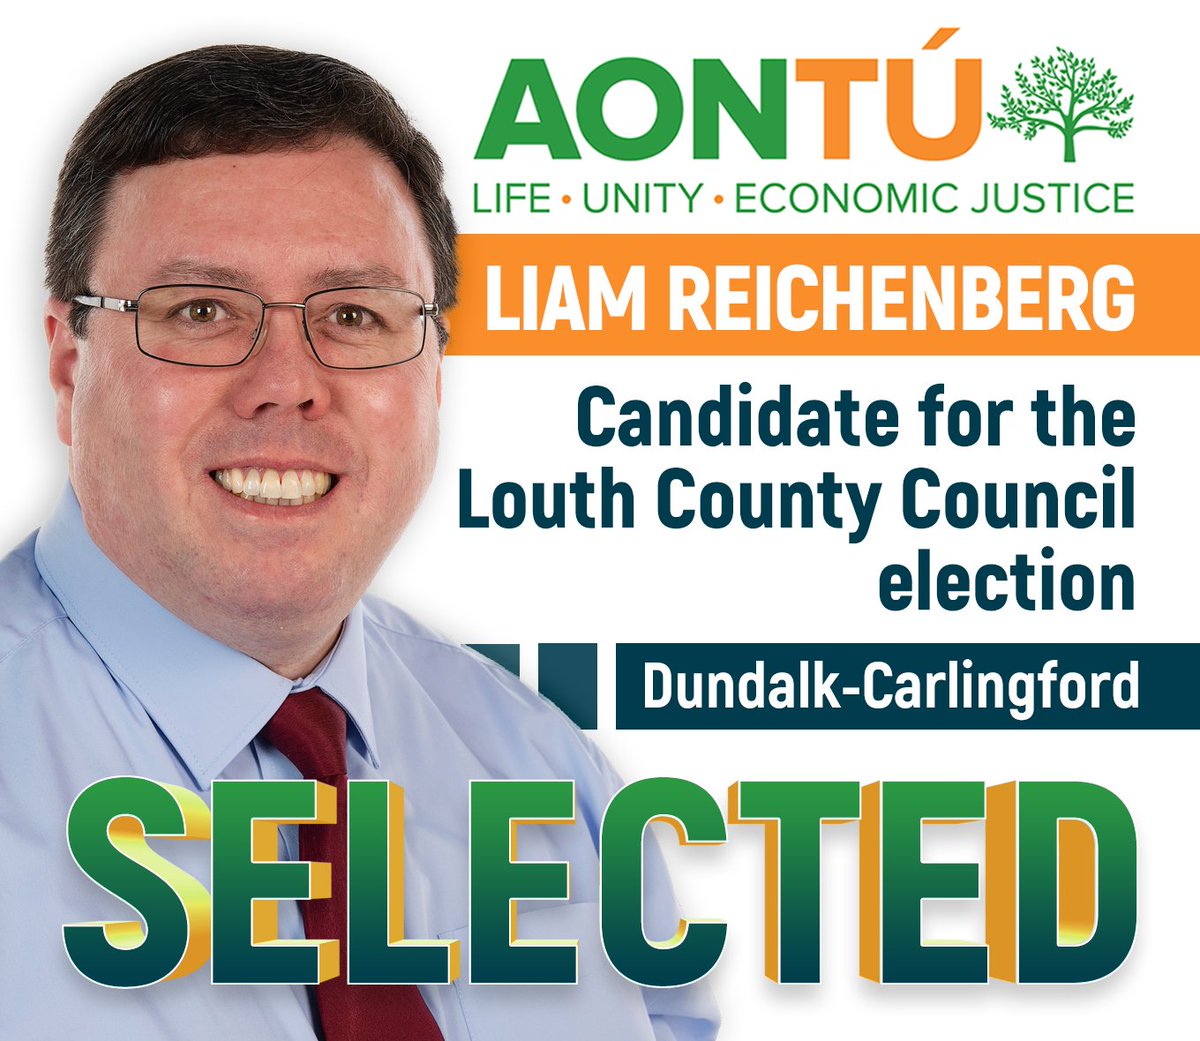 People of Carlingford & Dundalk, take note.
What a great councillor Liam would be. 
He would take no bull & deliver hugely for your area, every time.